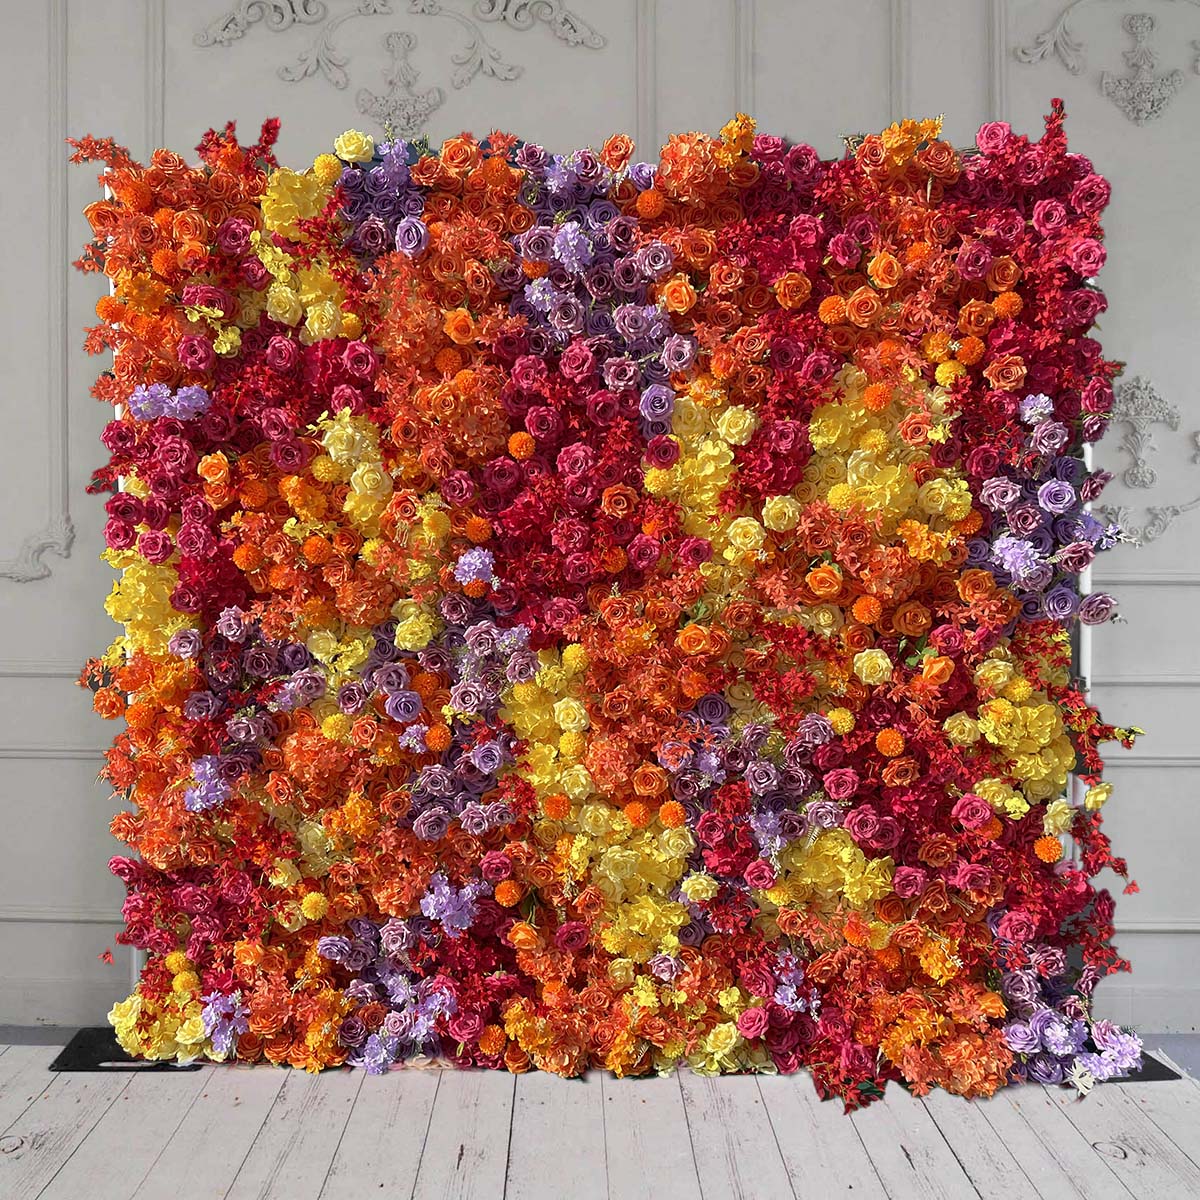 100% handmade, the yellow orange flower wall provides a lifelike appearance and is easy to set up.